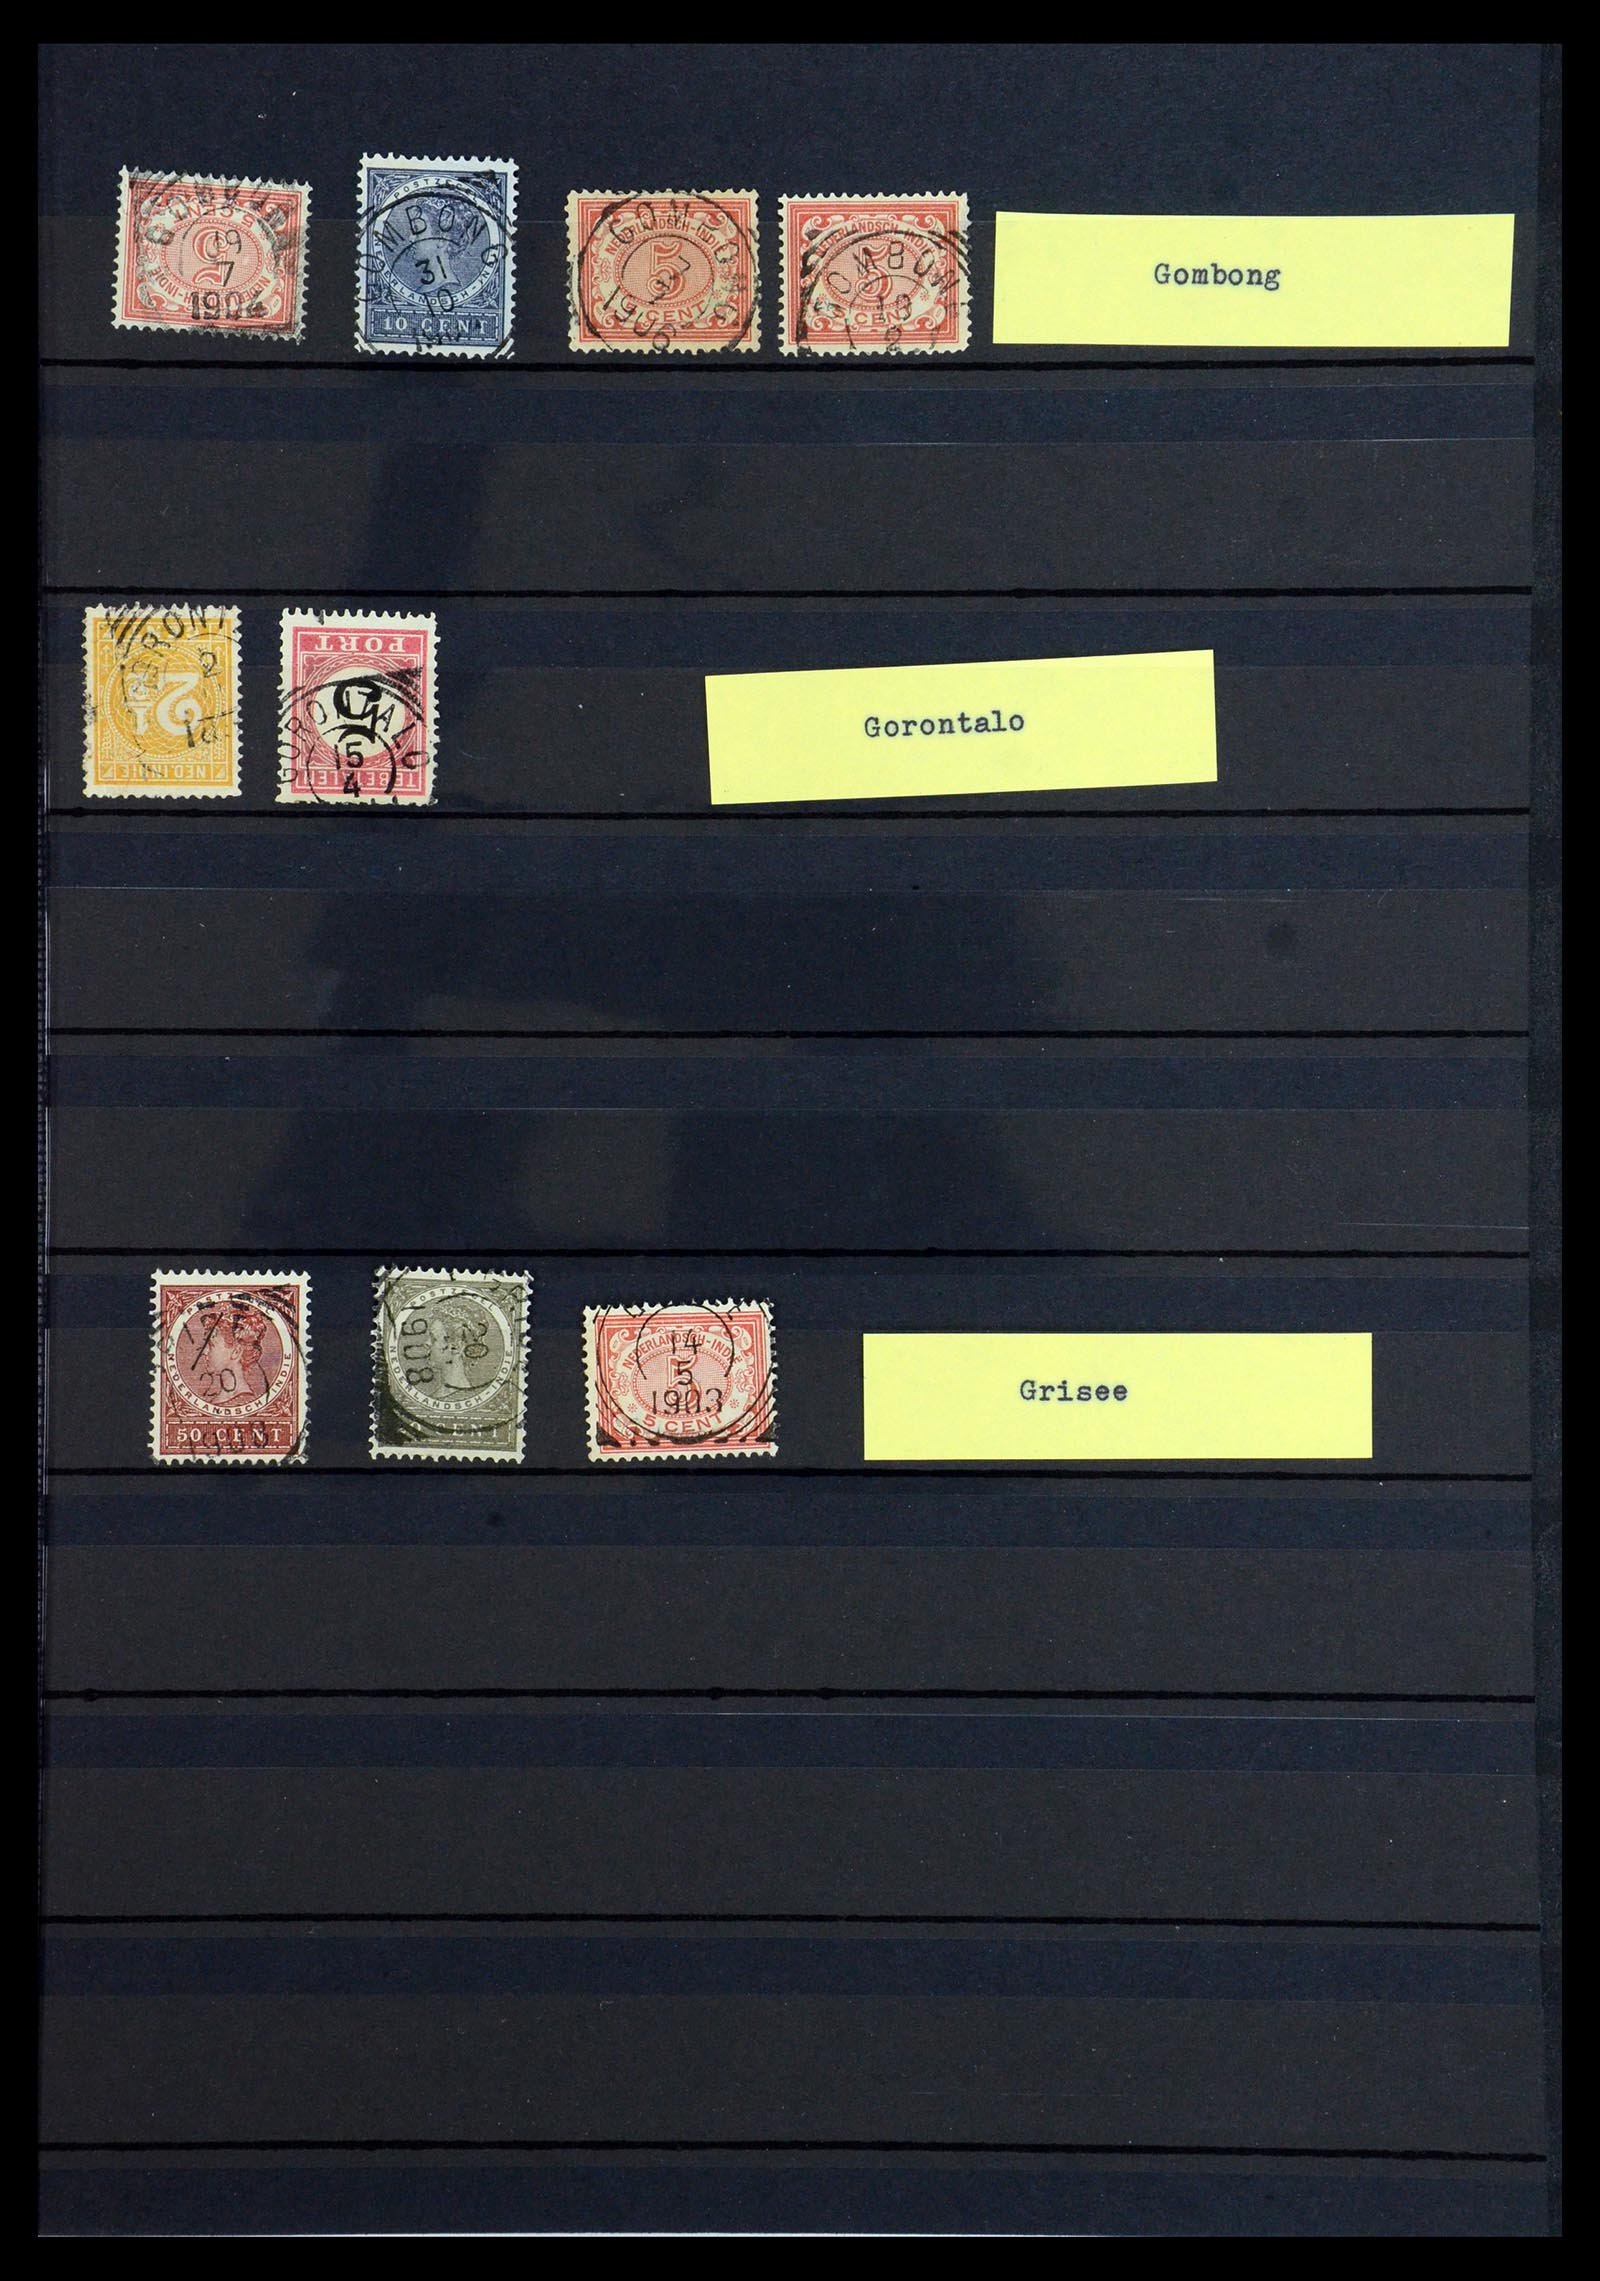 36371 017 - Stamp collection 36371 Dutch east Indies cancels.